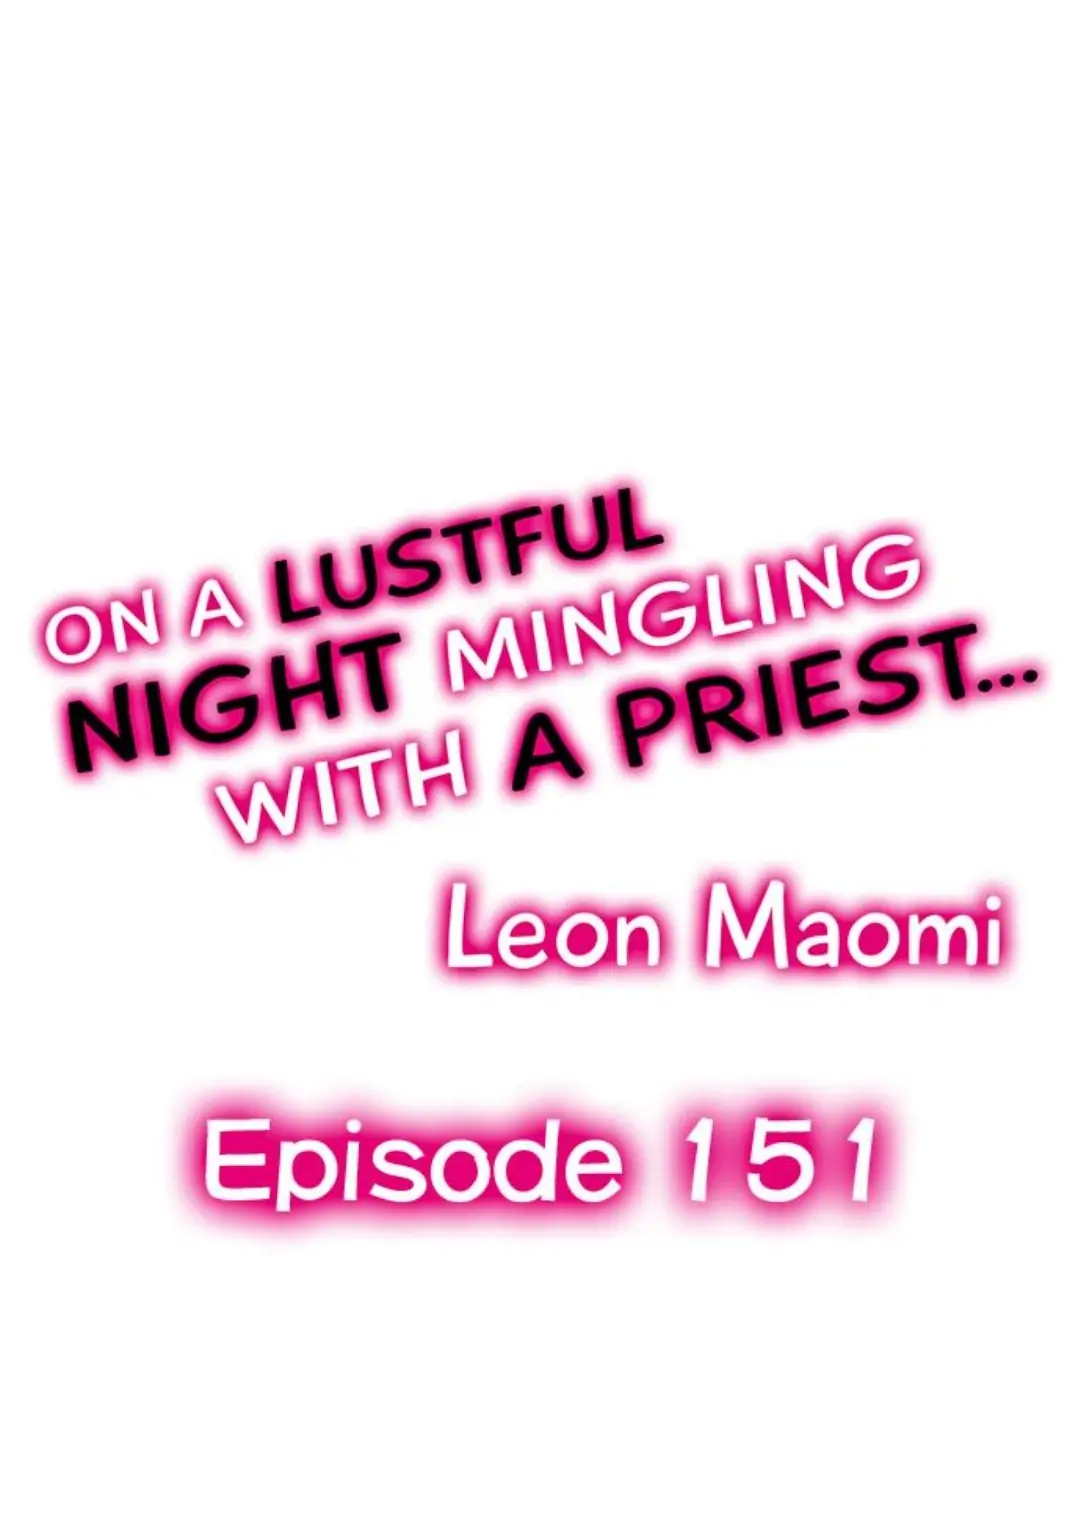 On a lustful night mingling with a priest full episodes